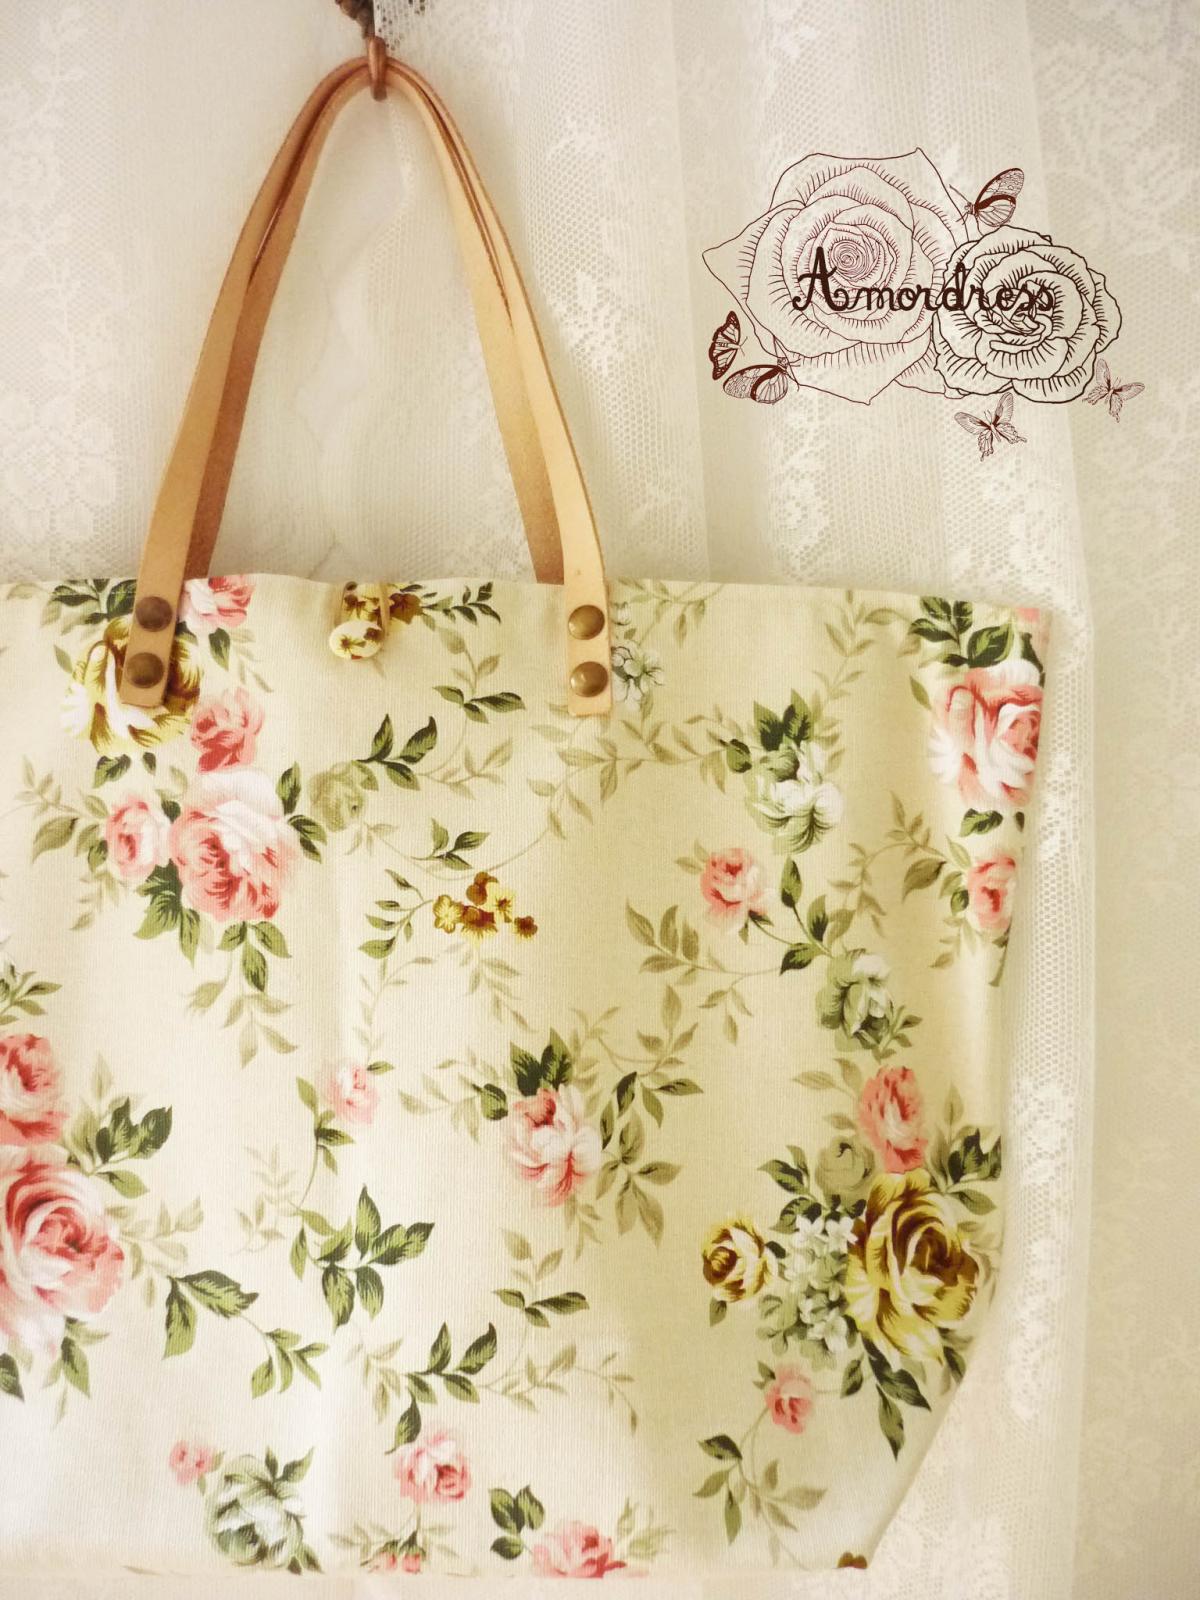 Floral Tote Bag Printed Canvas Bag Genuine Leather Strap Light Khaki With Pink Rose Shabby Chic ...